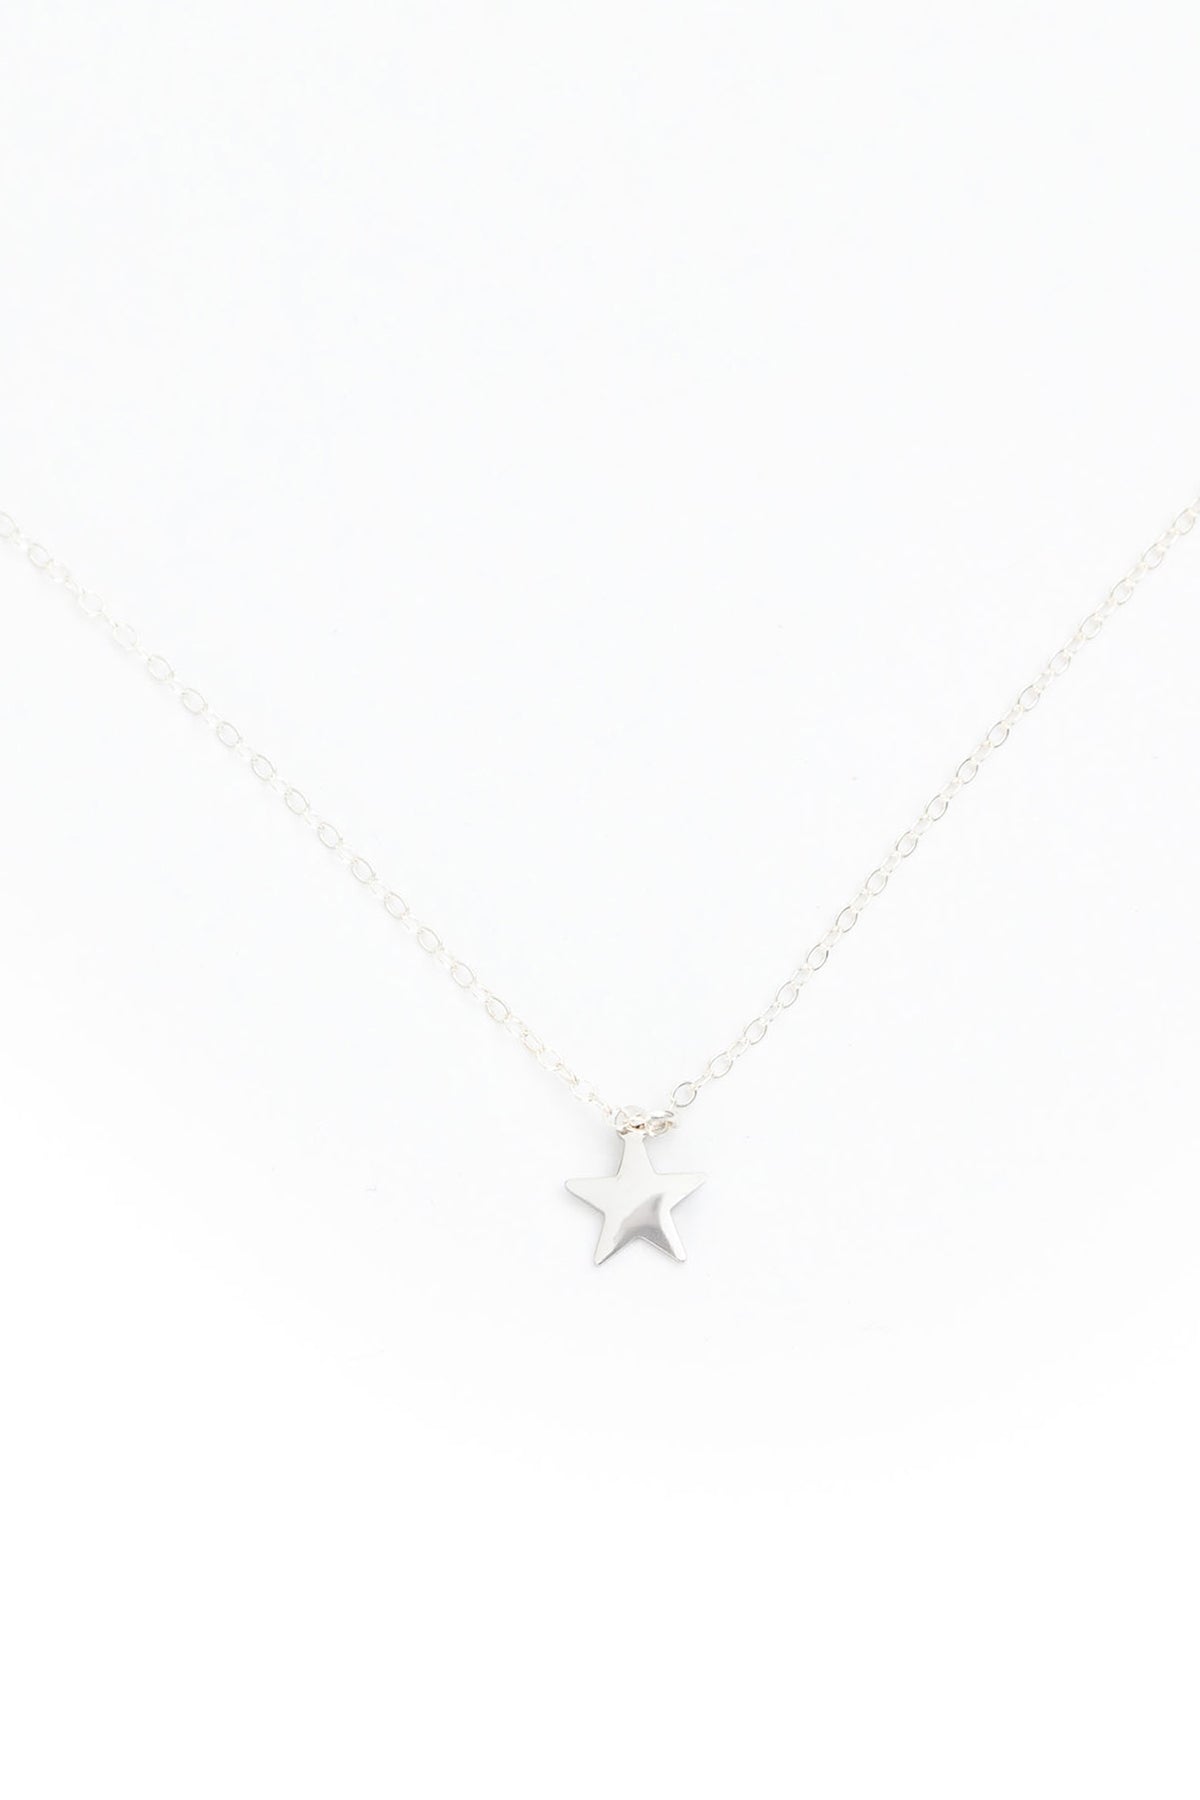   STAR NECKLACE by SEOUL LITTLE 